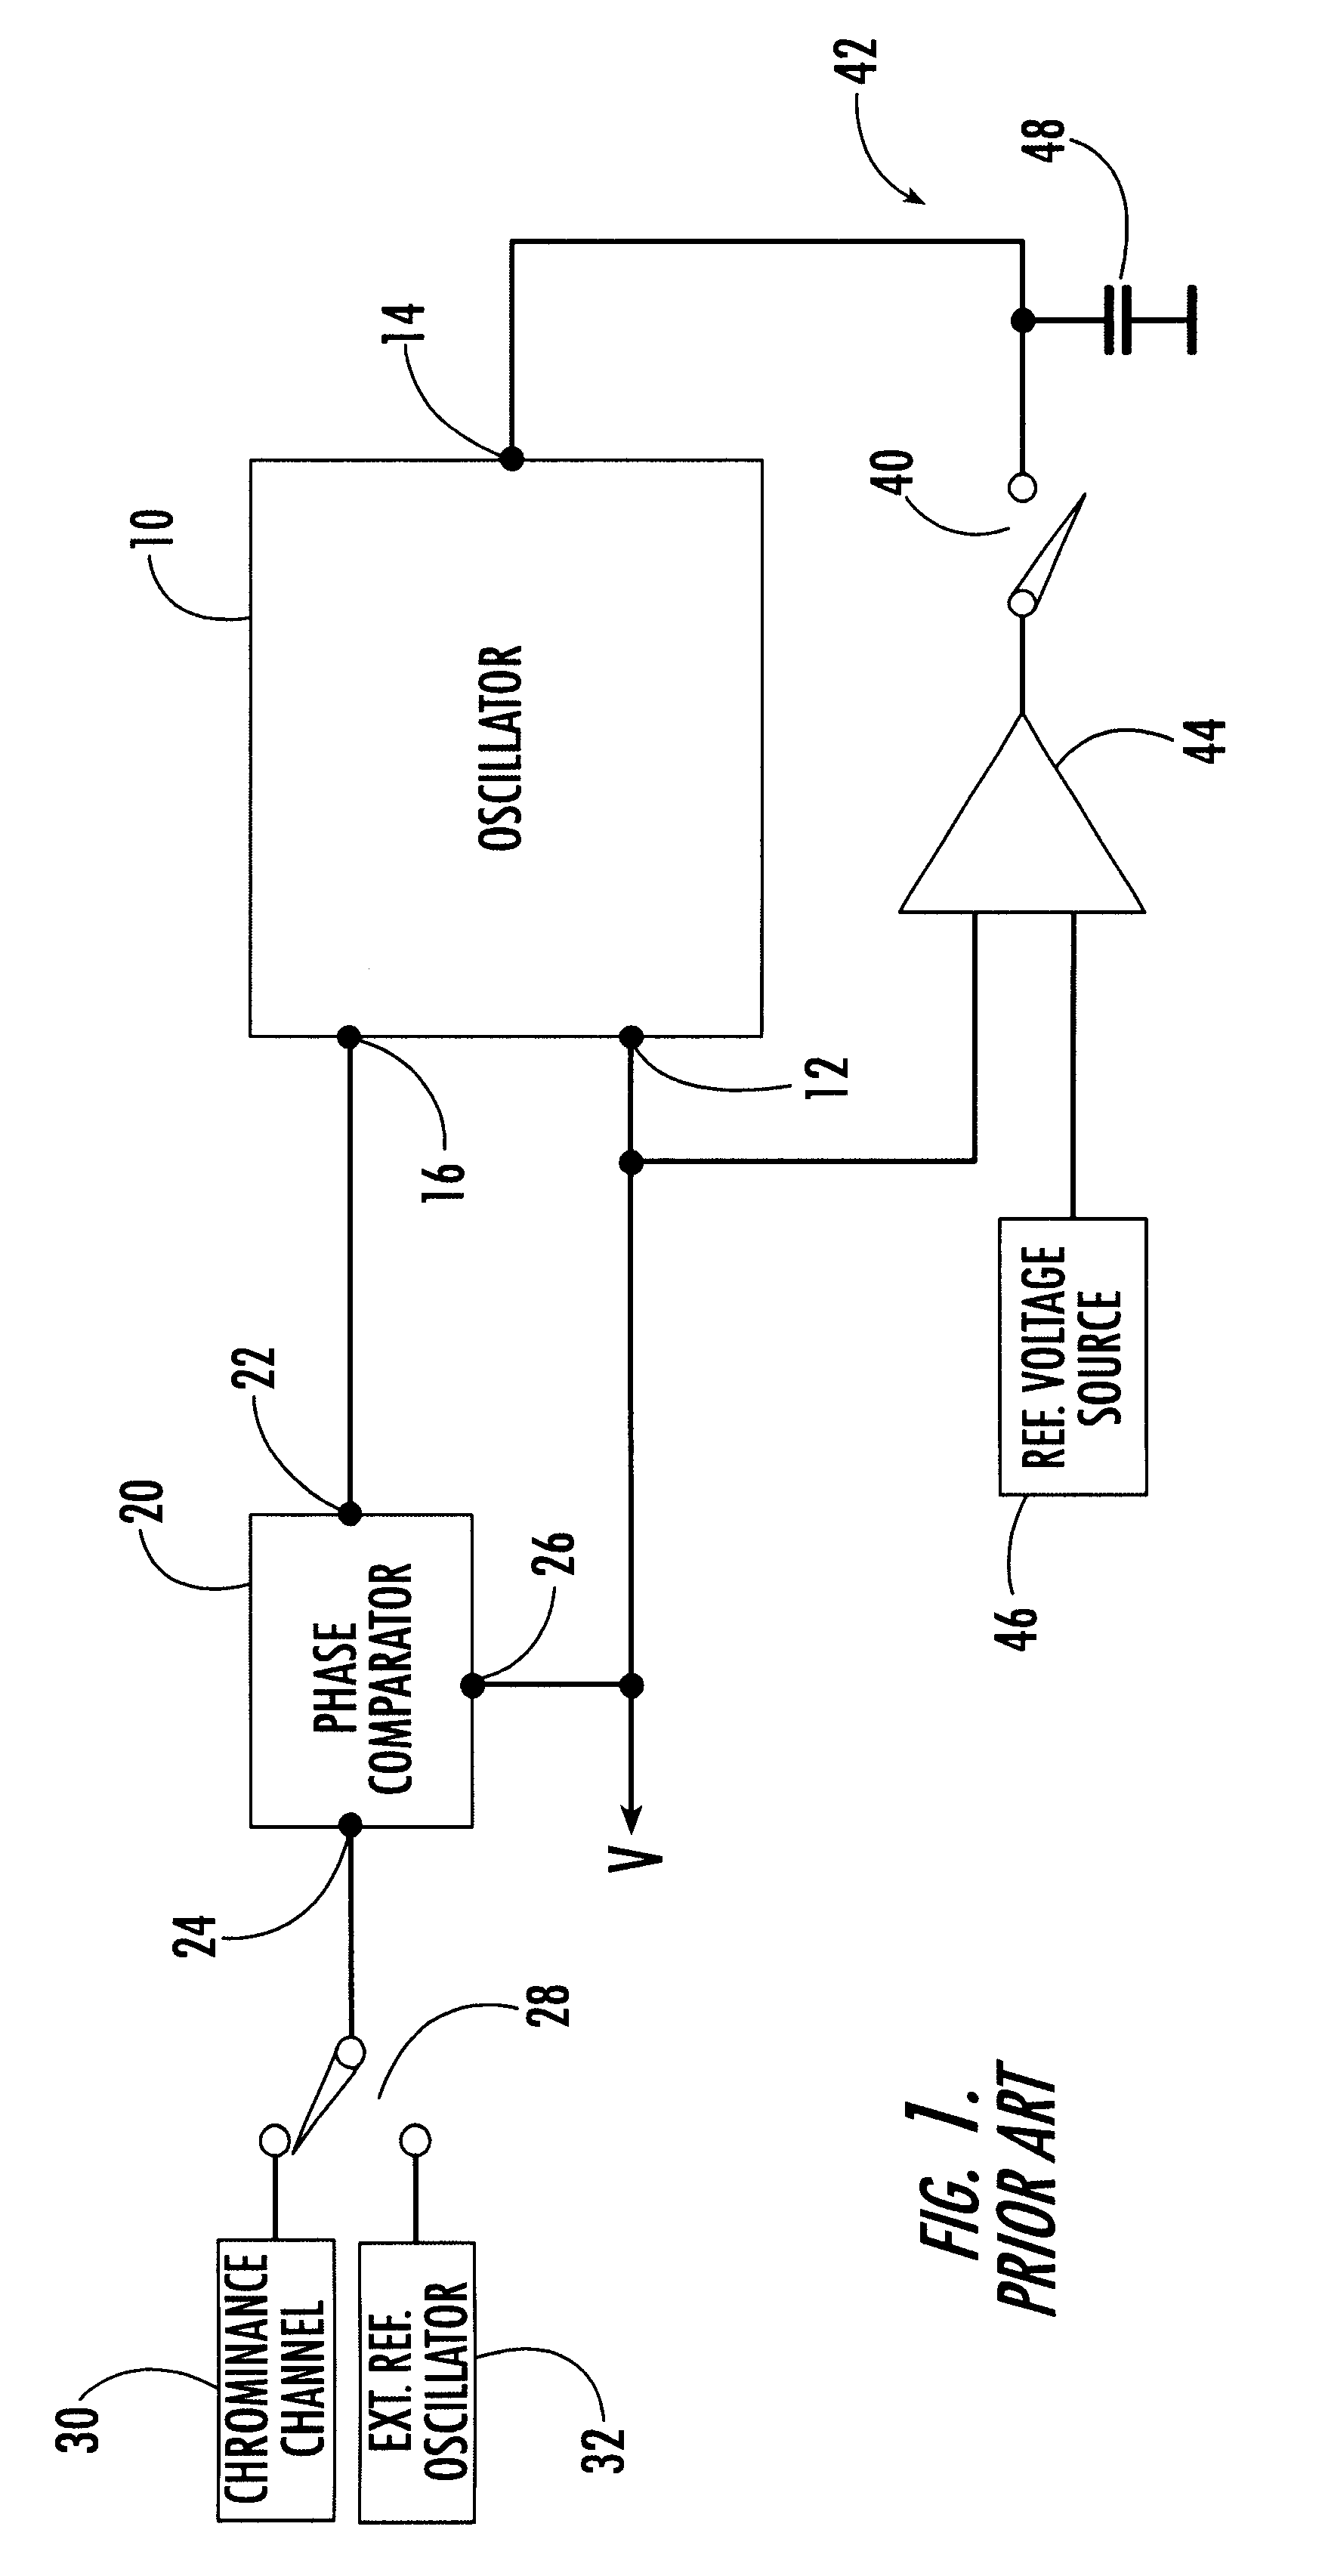 Demodulator, particularly for a SECAM chrominance signal, with double frequency adjustment